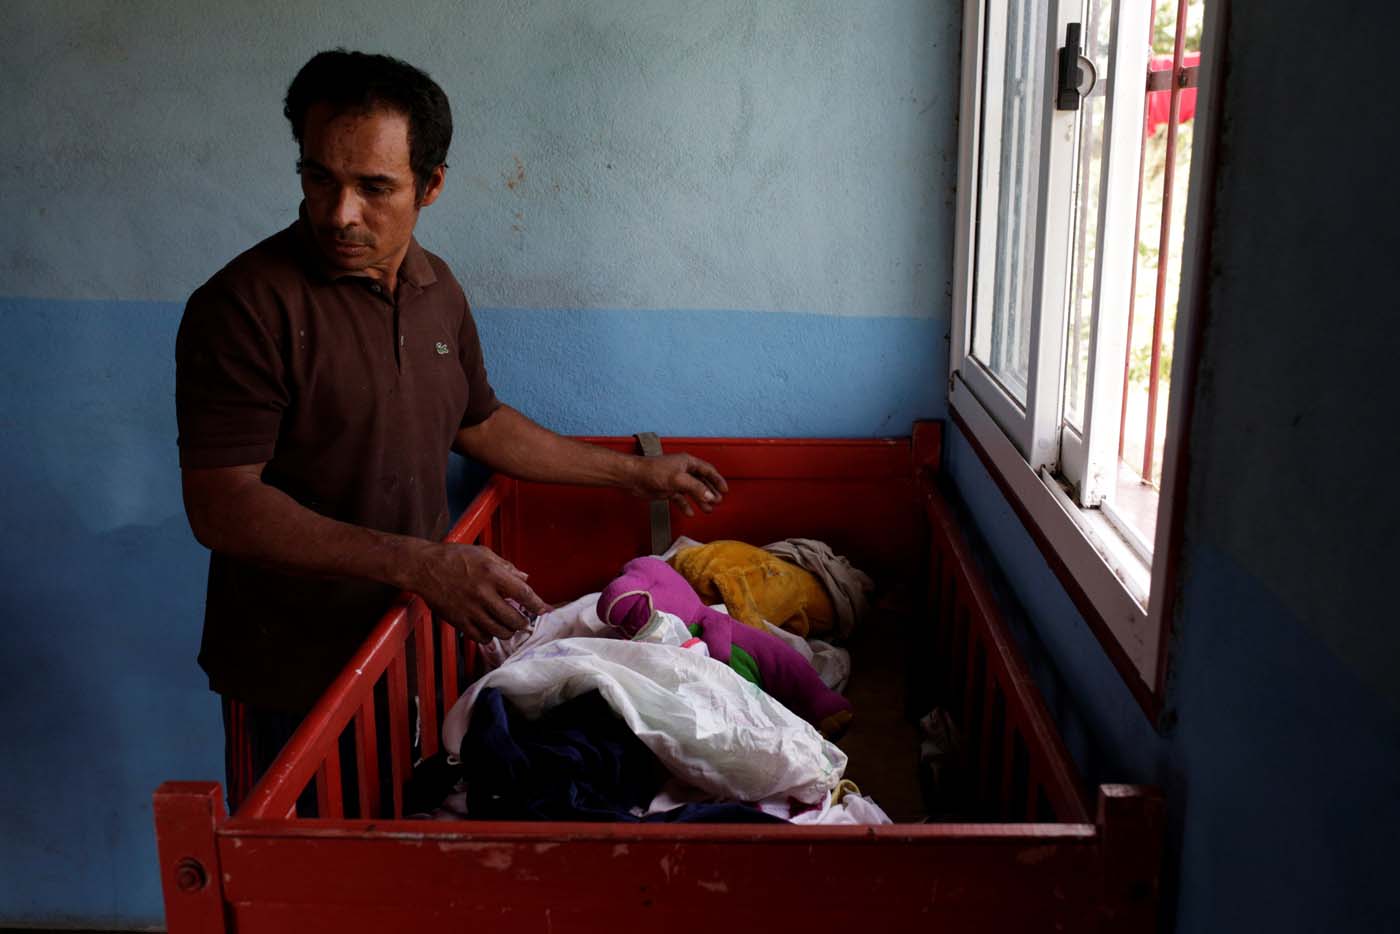 Tulio Medina, father of Eliannys Vivas, who died from diphtheria, puts clothes on a cot at his home in Pariaguan, Venezuela January 26, 2017. Picture taken January 26, 2017. REUTERS/Marco Bello